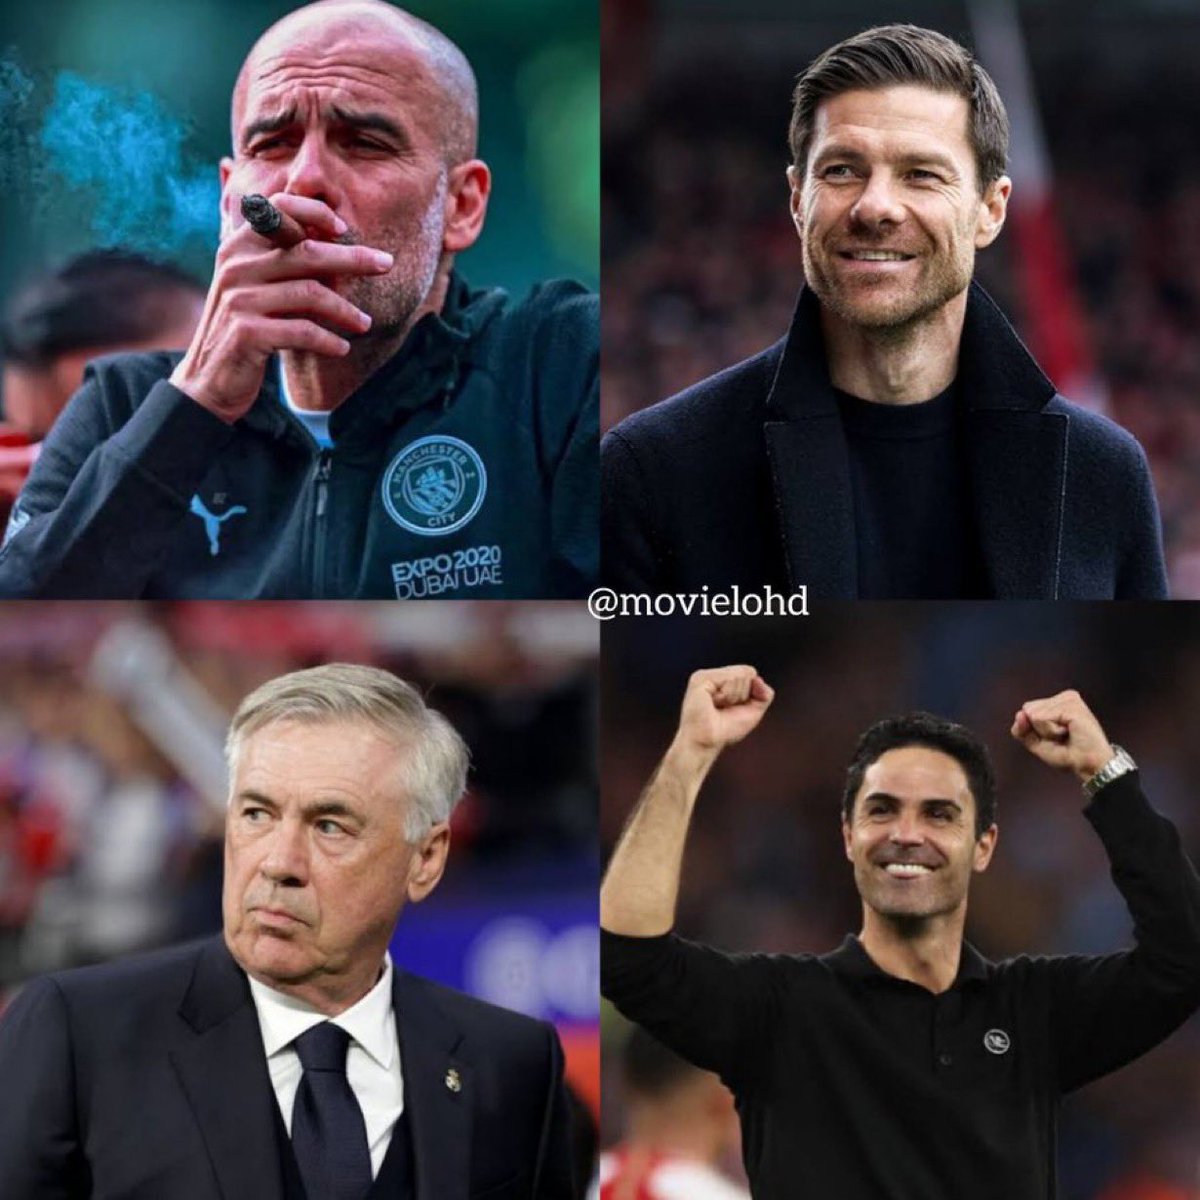 Which one deserves Manager of the Year award ?
1. Pep 
2. Alonso 
3. Carlo 
4. Arteta